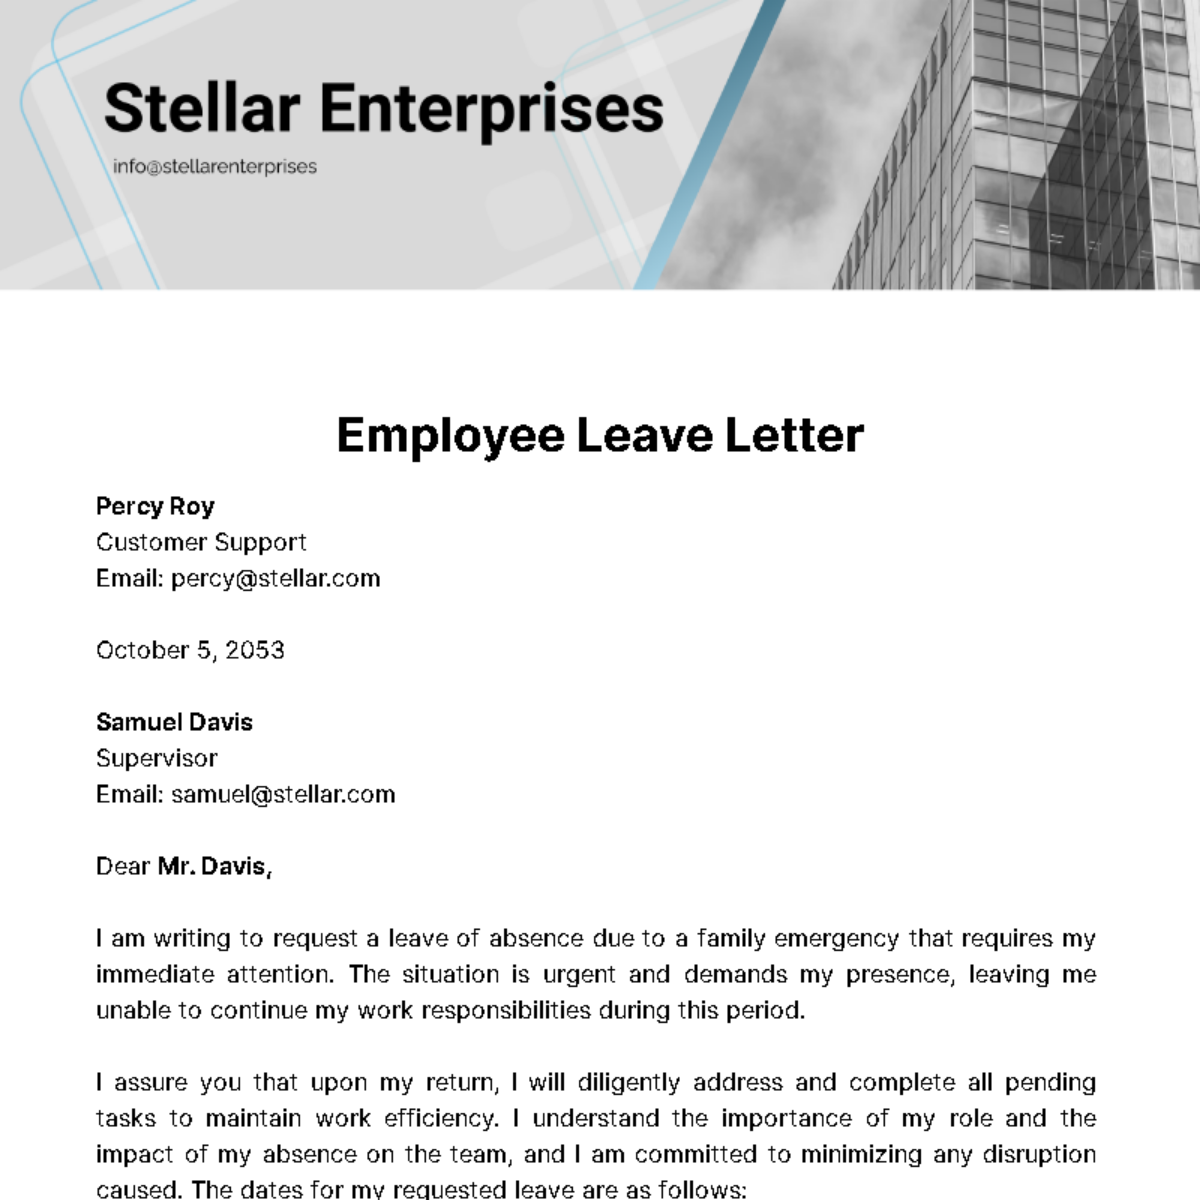 Employee Leave Letter Template